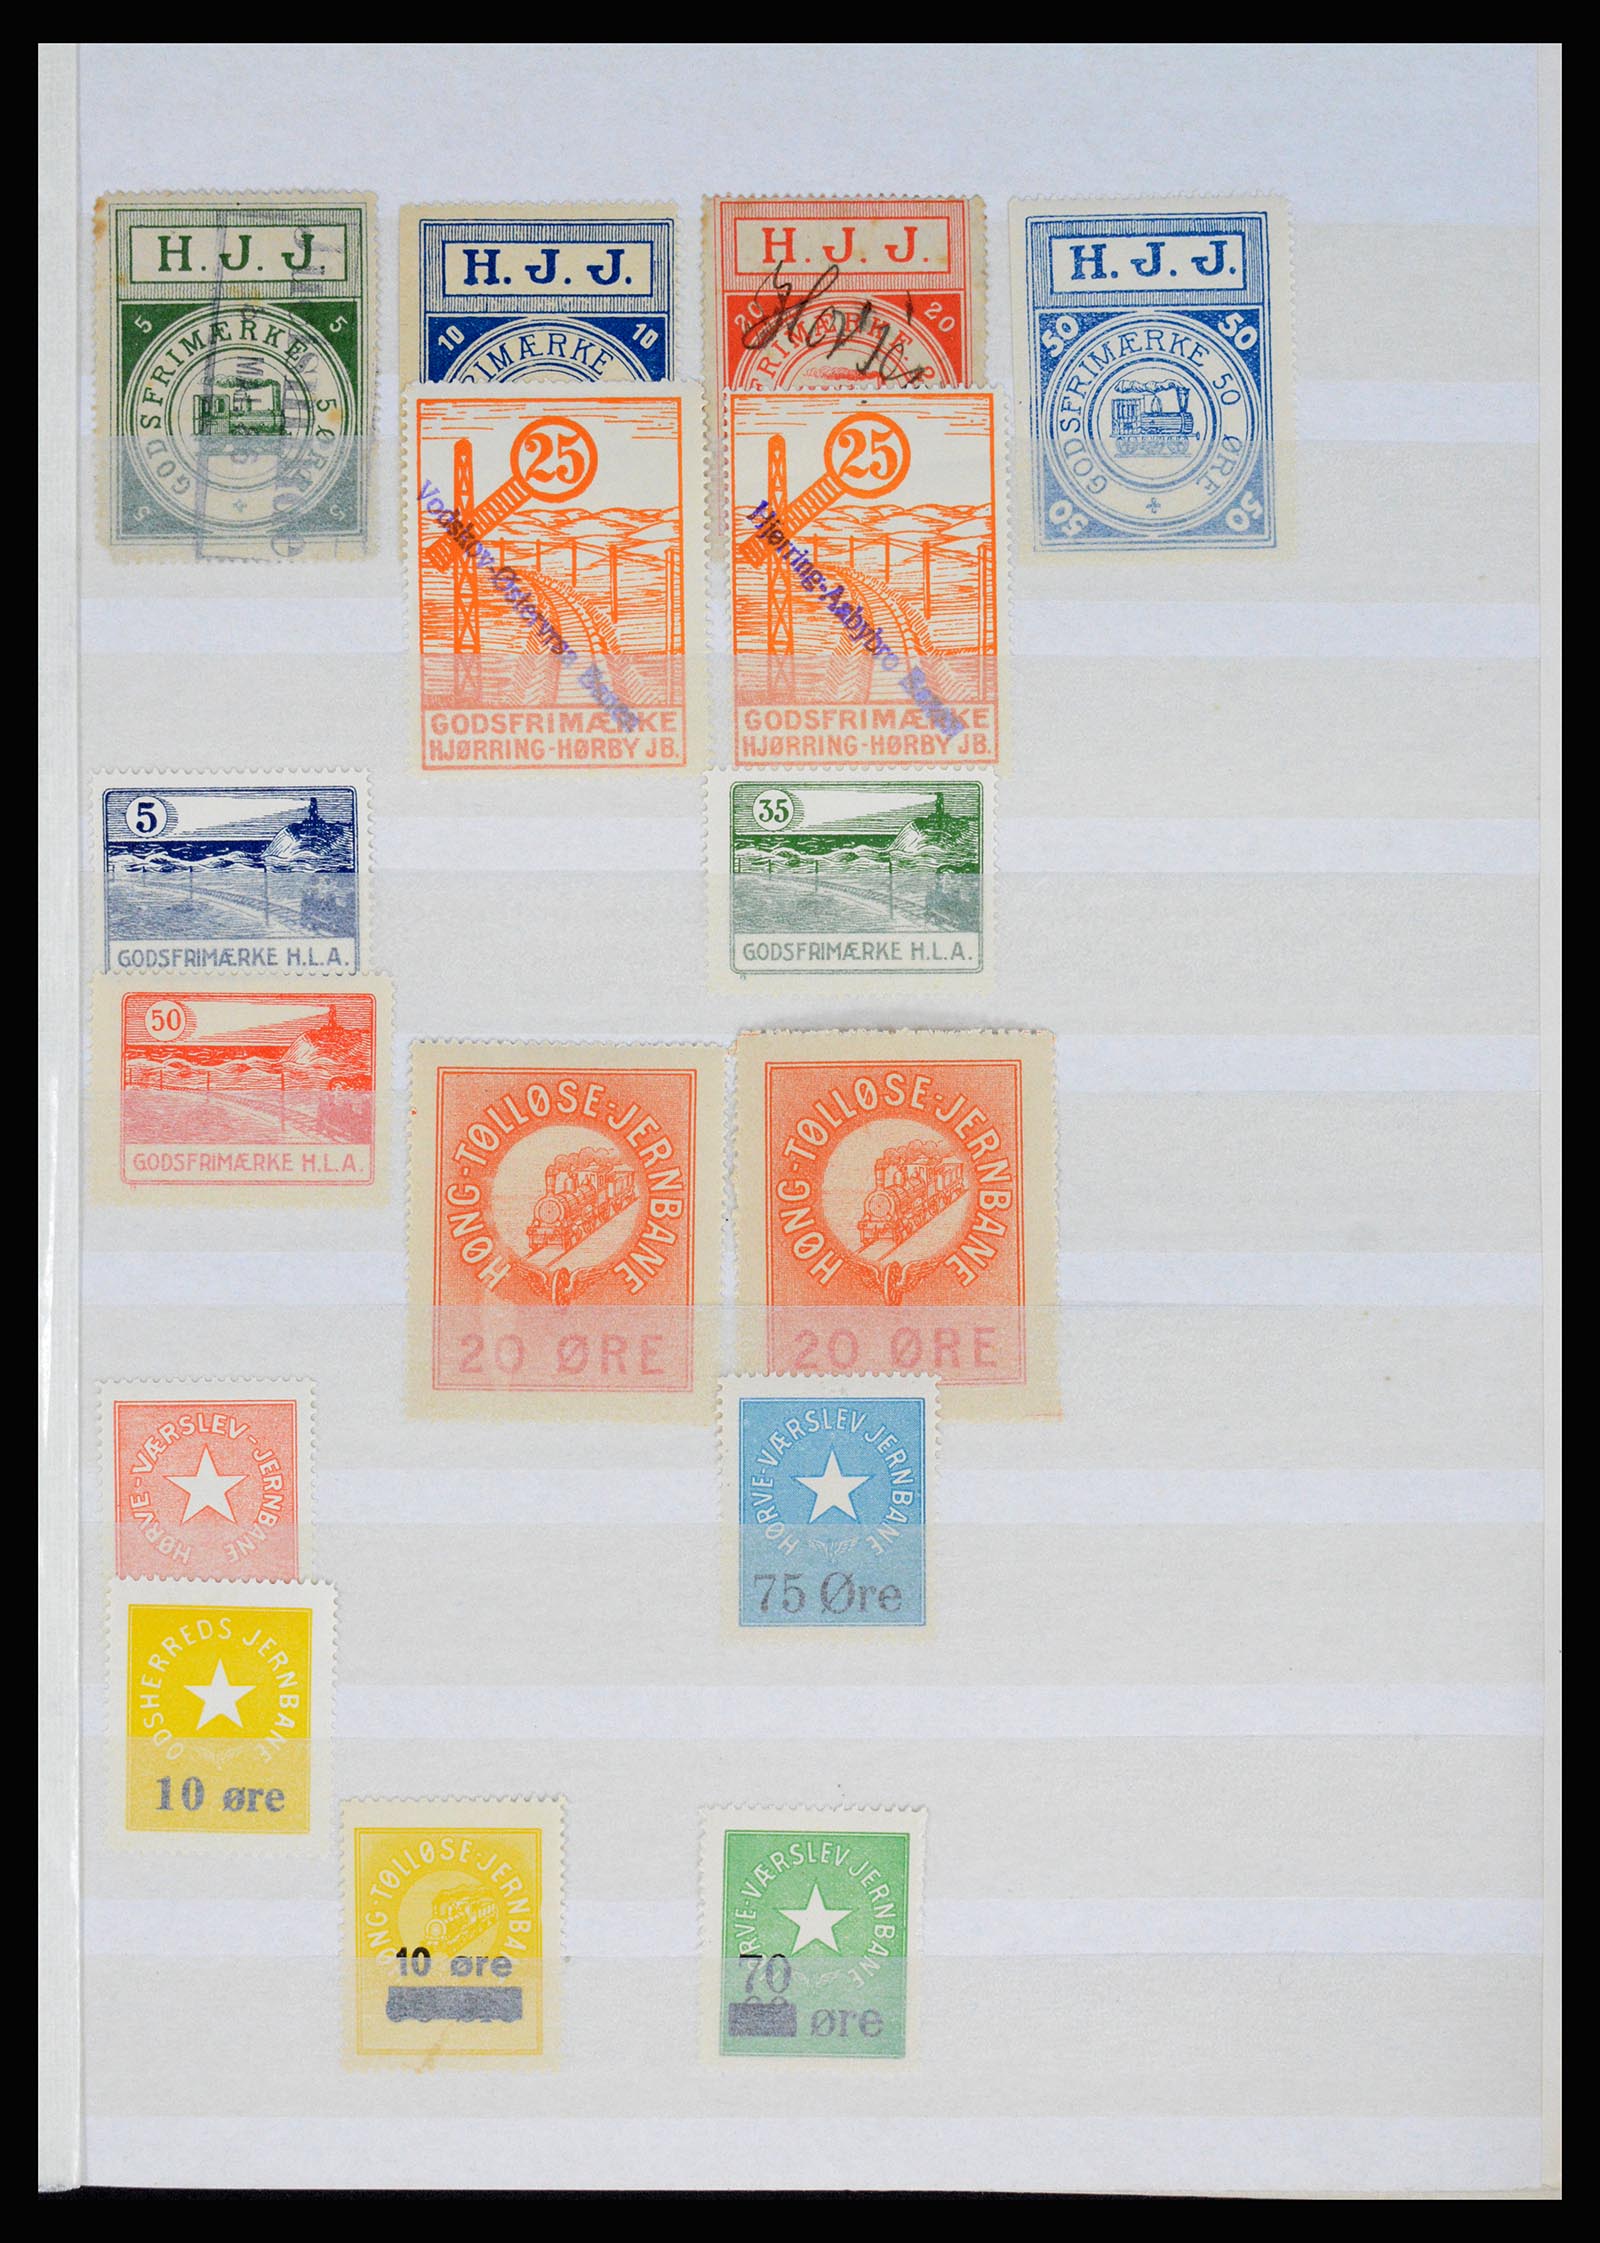 36982 027 - Stamp collection 36982 Denmark railroad stamps.